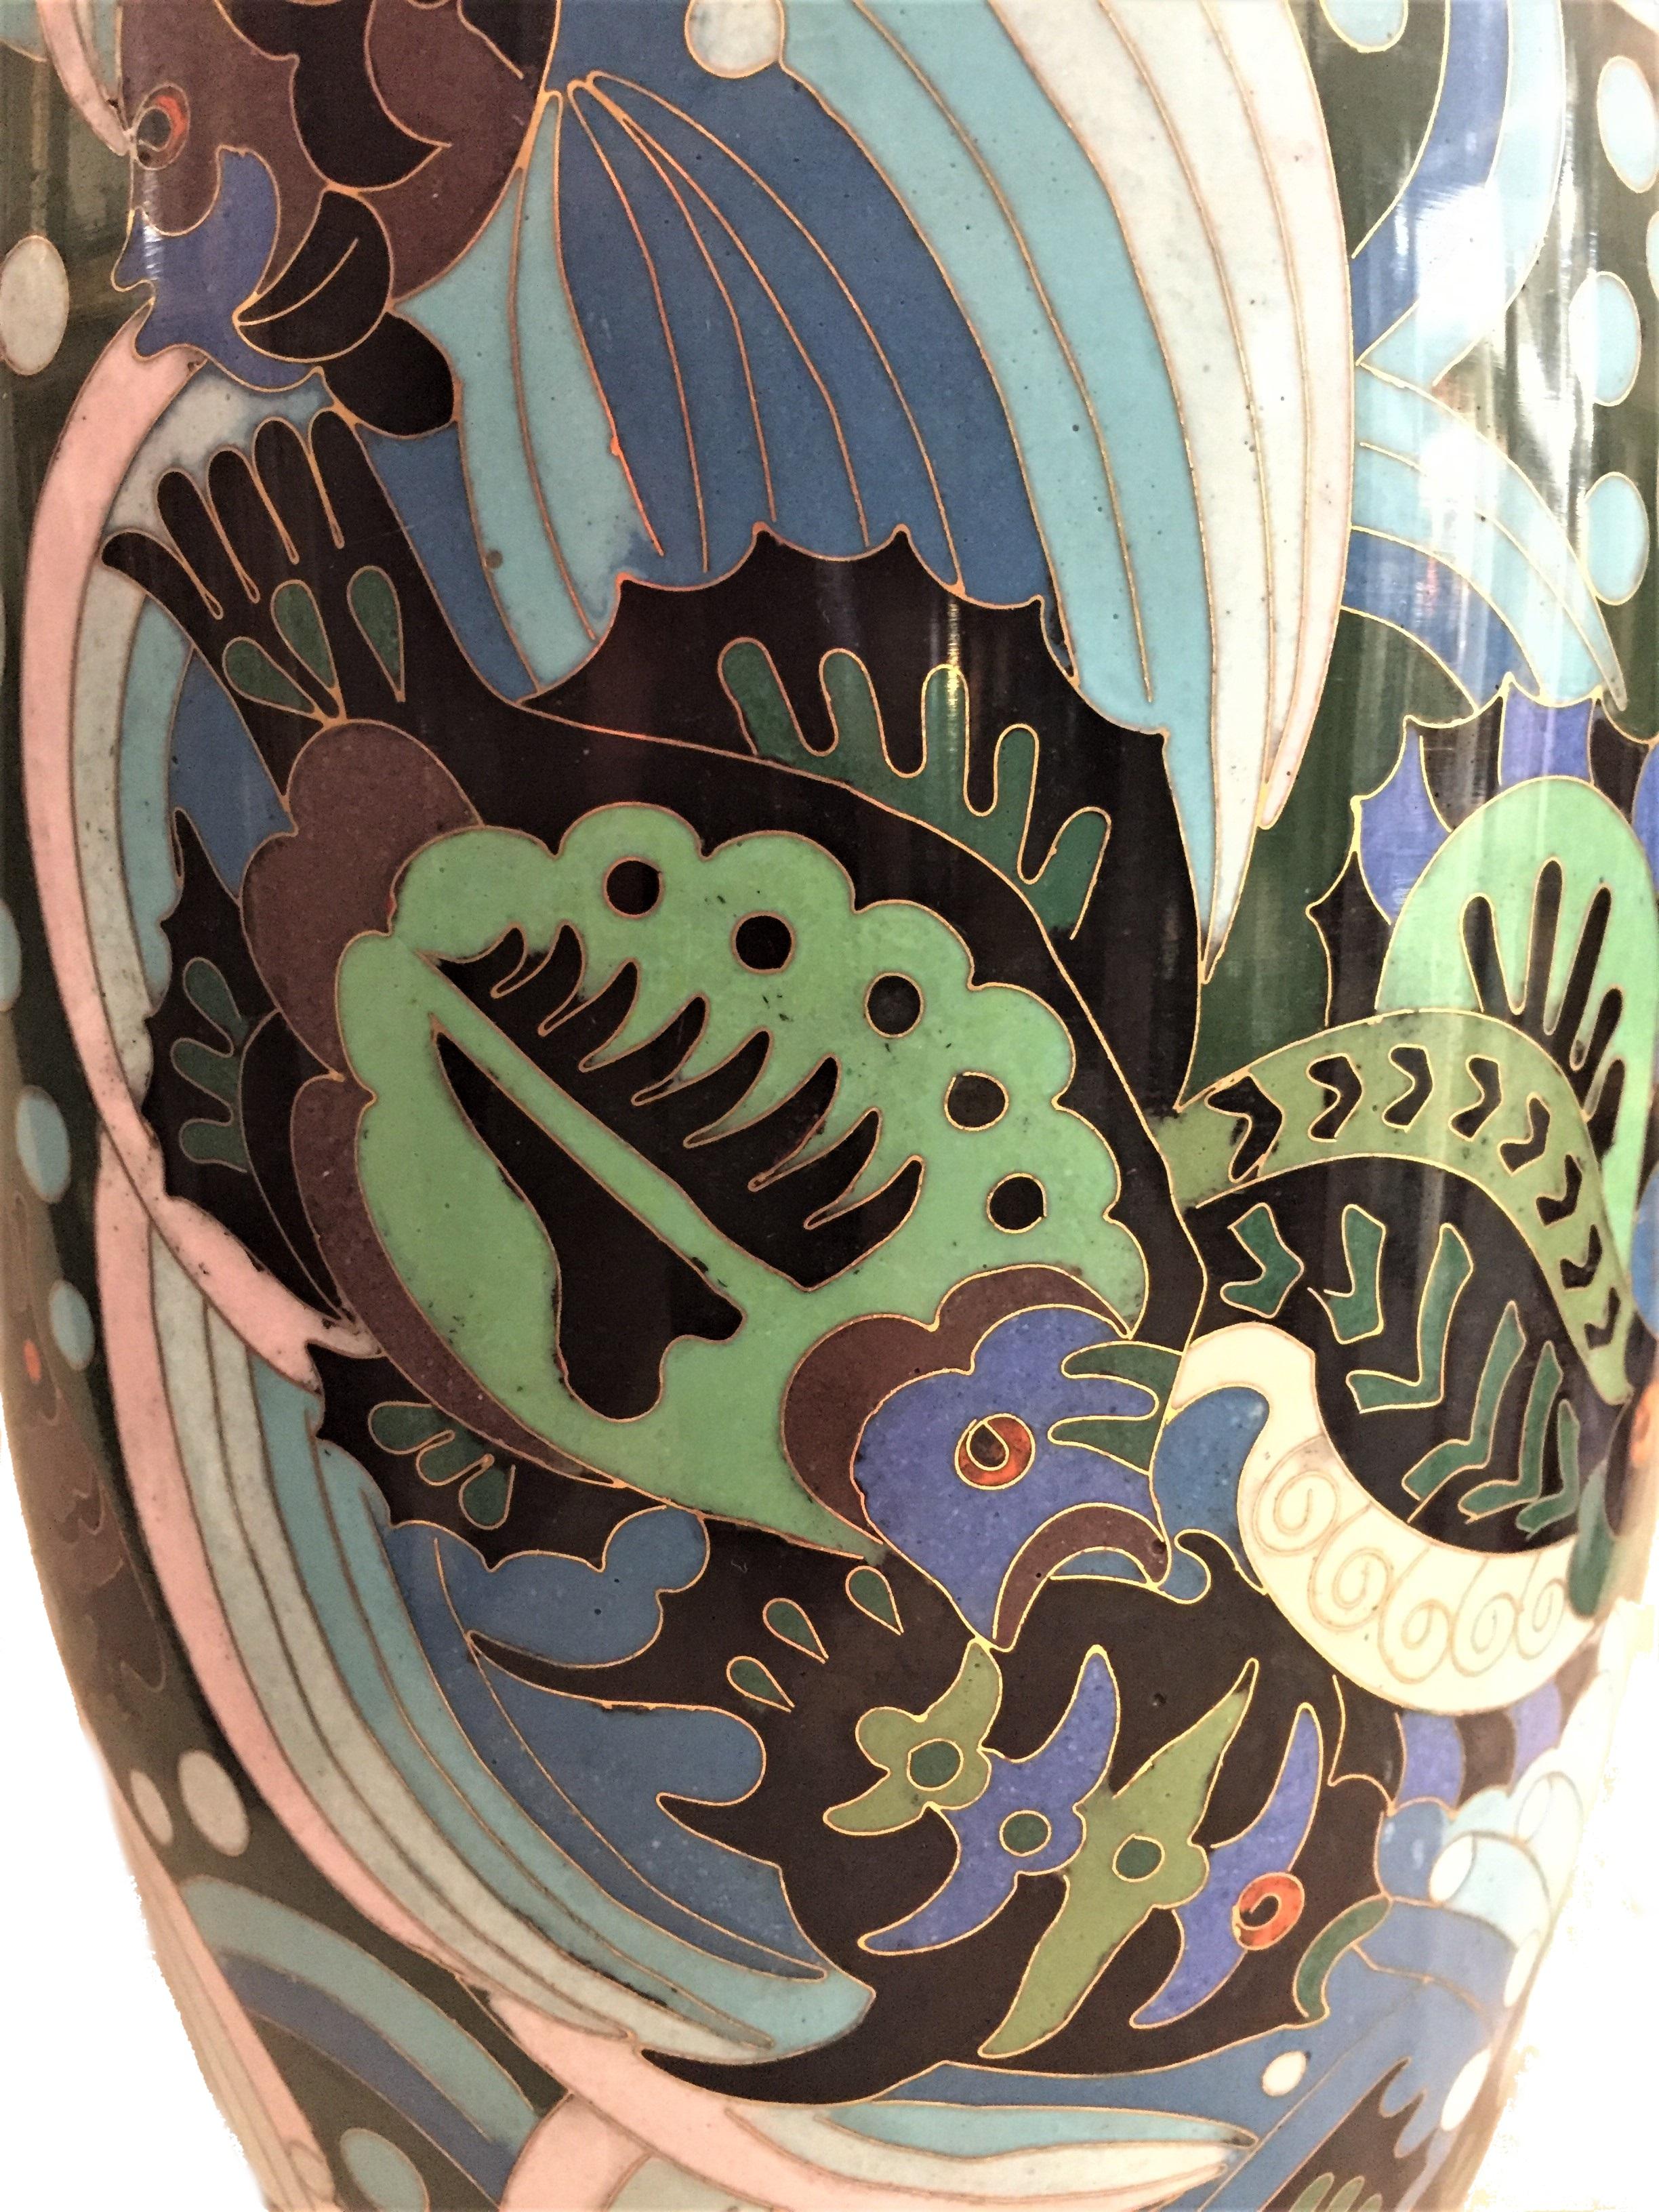 Early 20th Century French Art Deco Cloisonné Enamel Vase with Fish and Sea Horses, circa 1920s